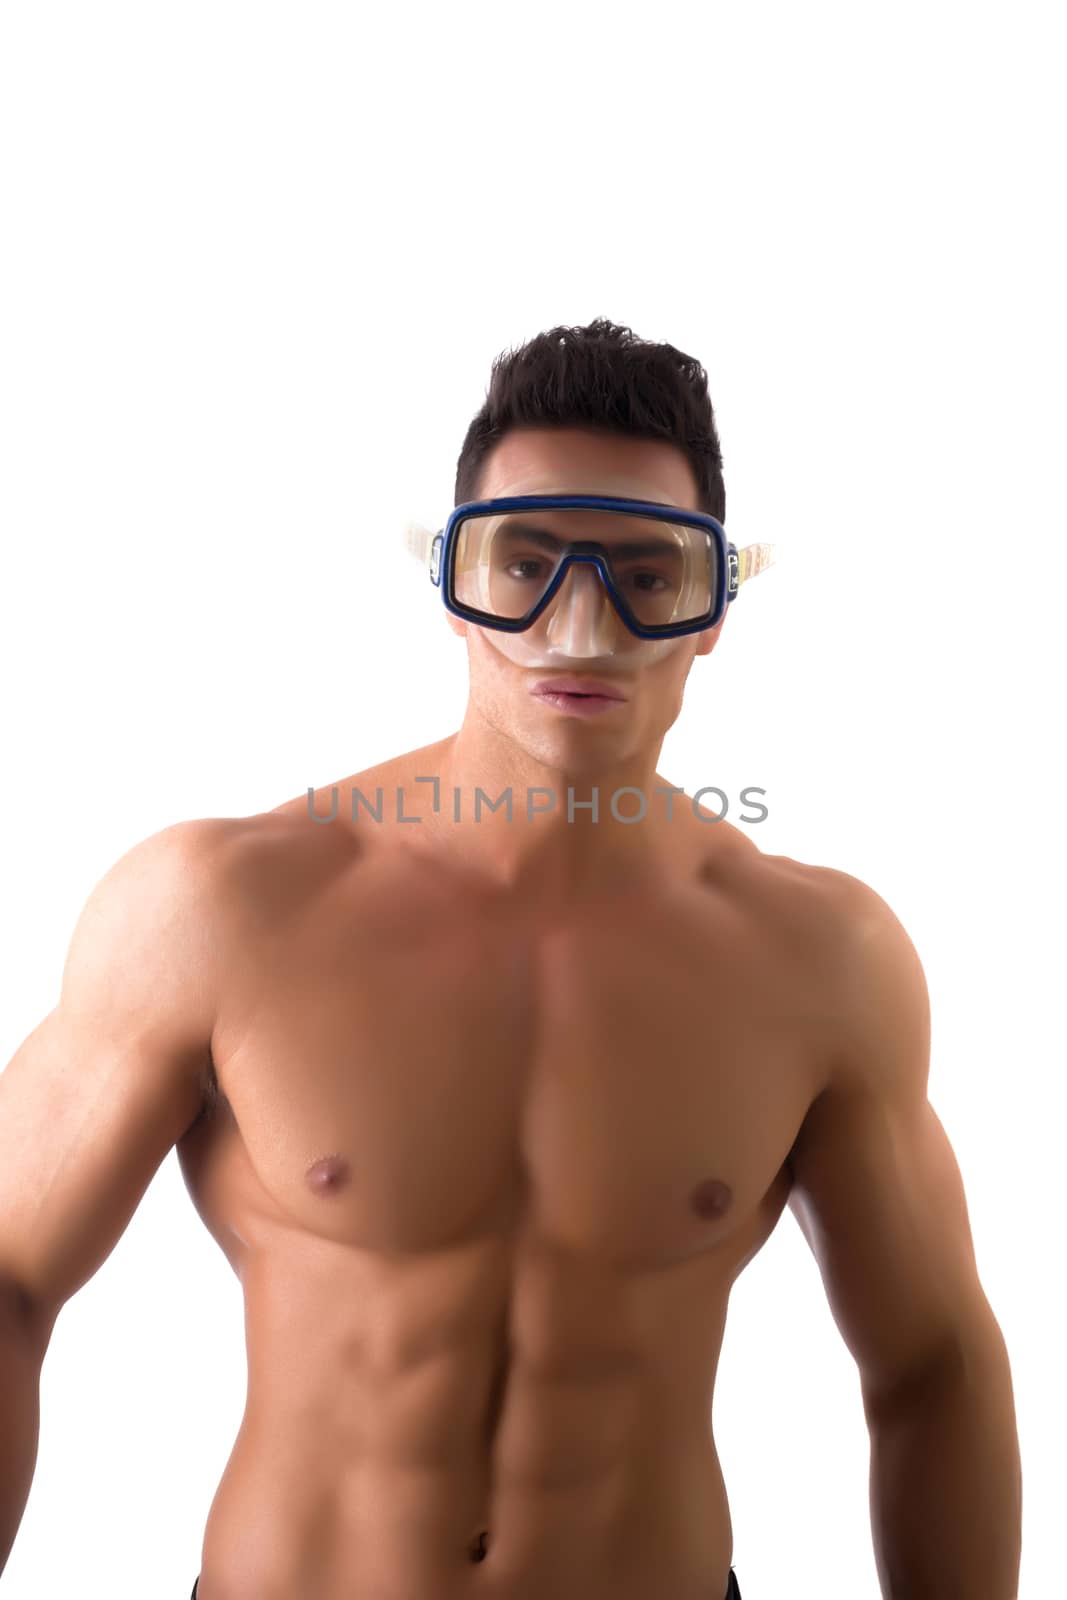 Muscular young man with swimming mask or goggles, isolated on white